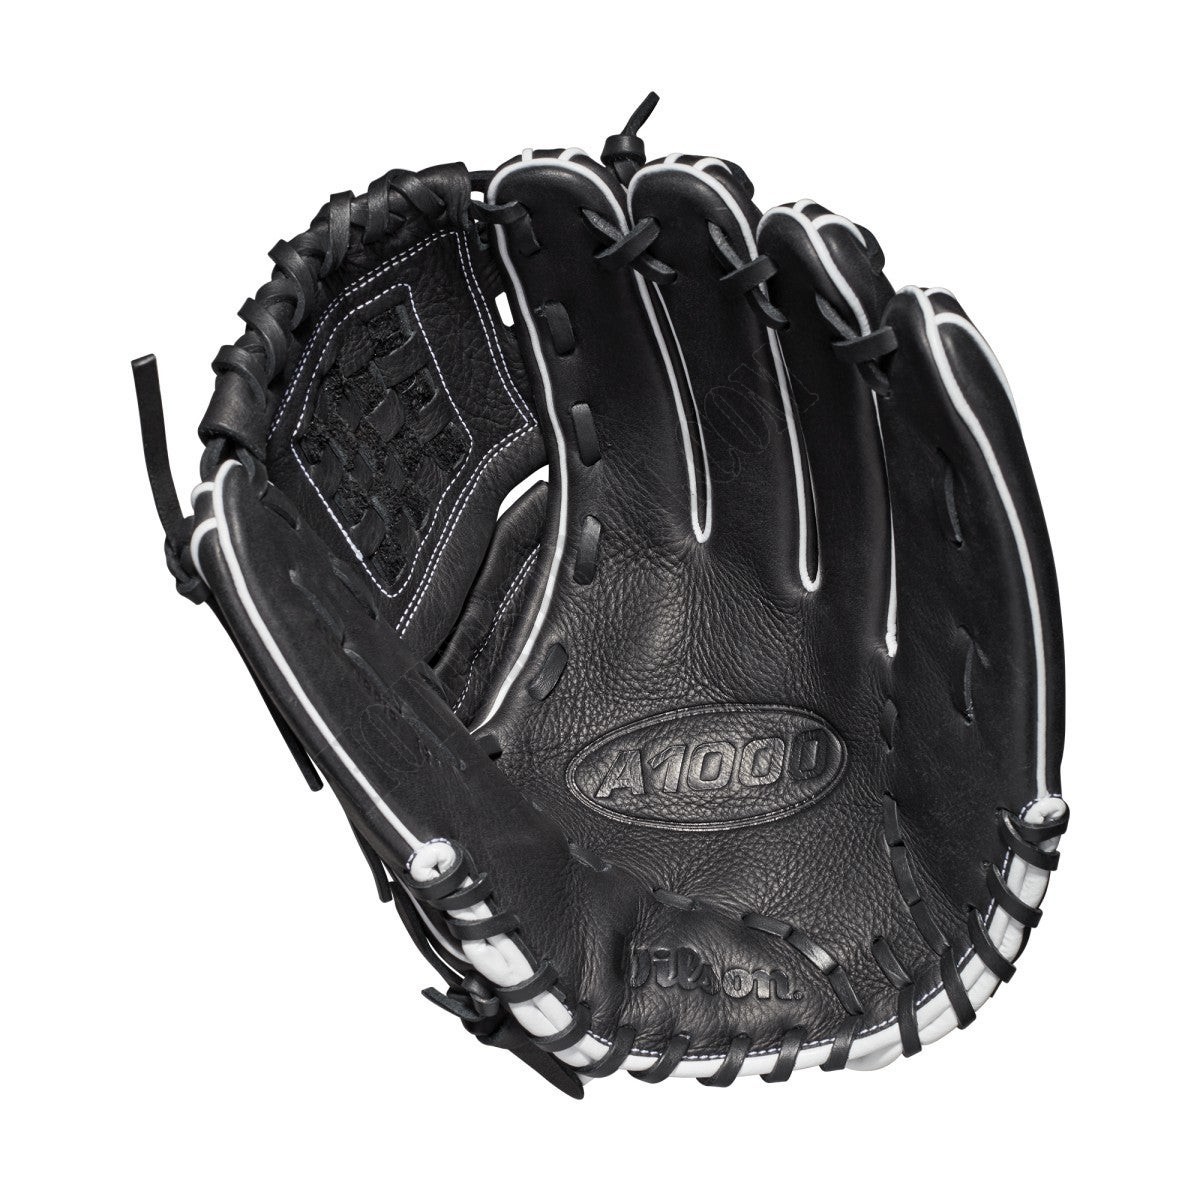 2019 A1000 12" Pitcher's Fastpitch Glove ● Wilson Promotions - -2